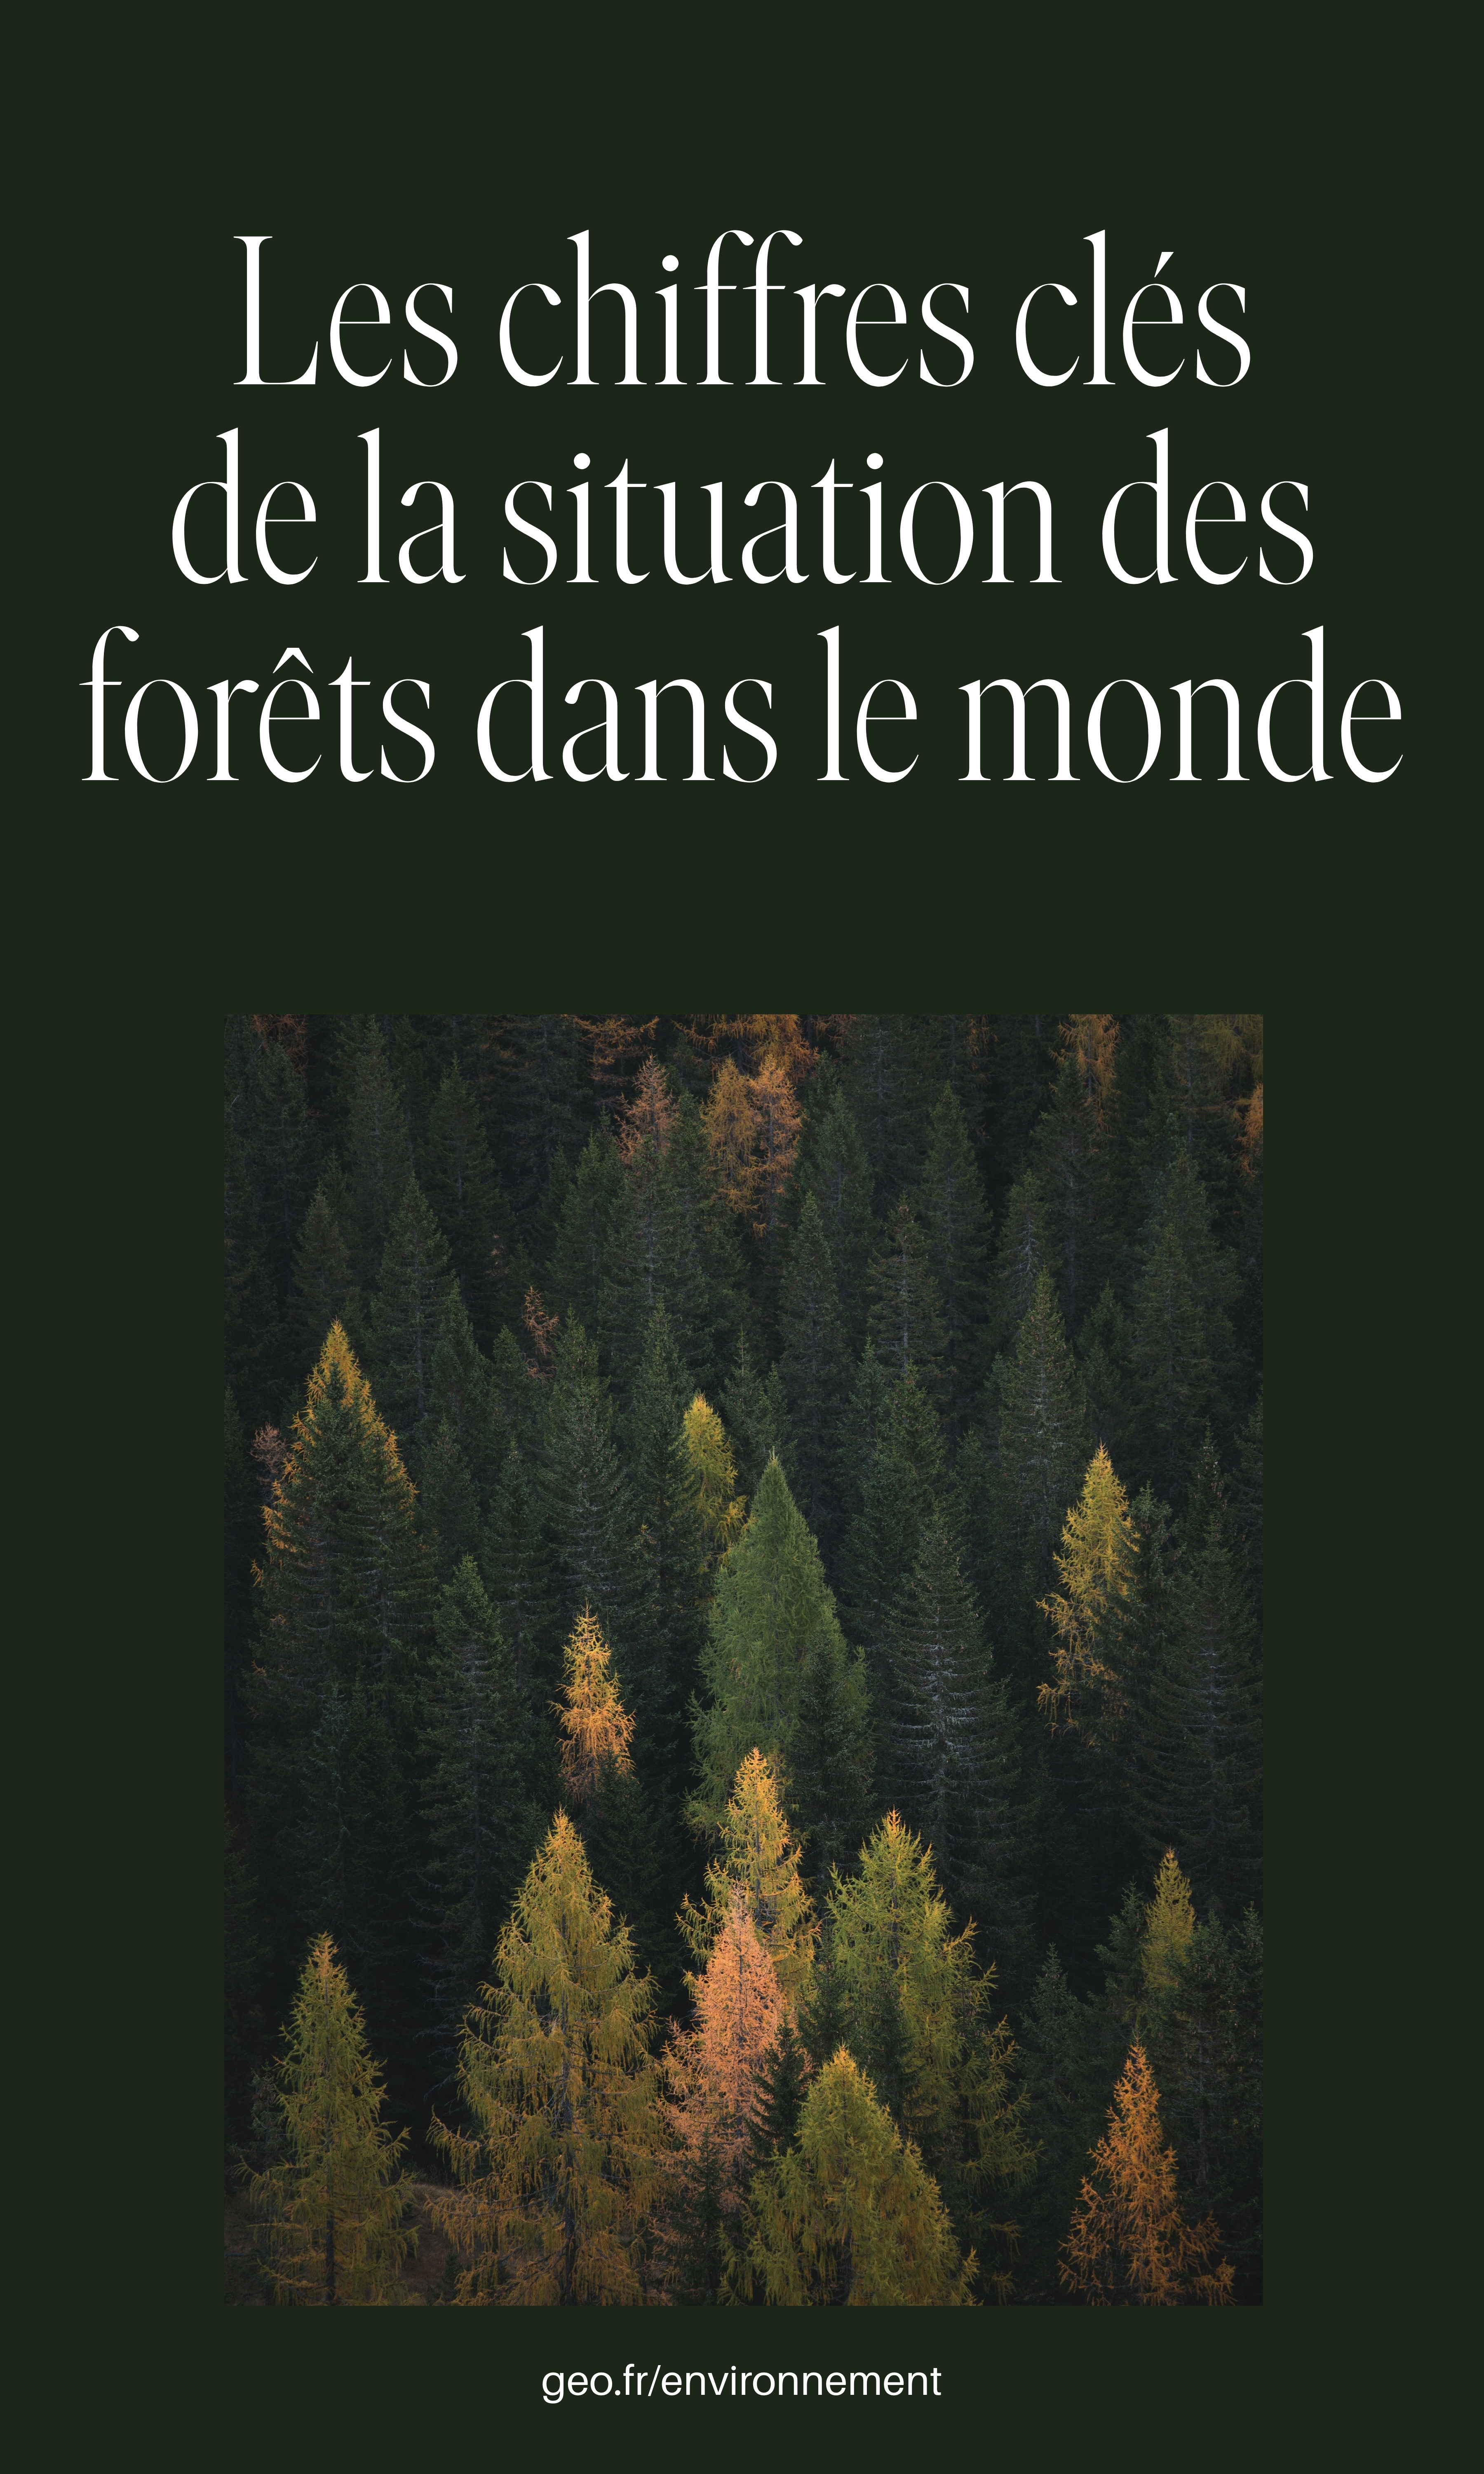 Key figures  as regards the situation of the forests in the world